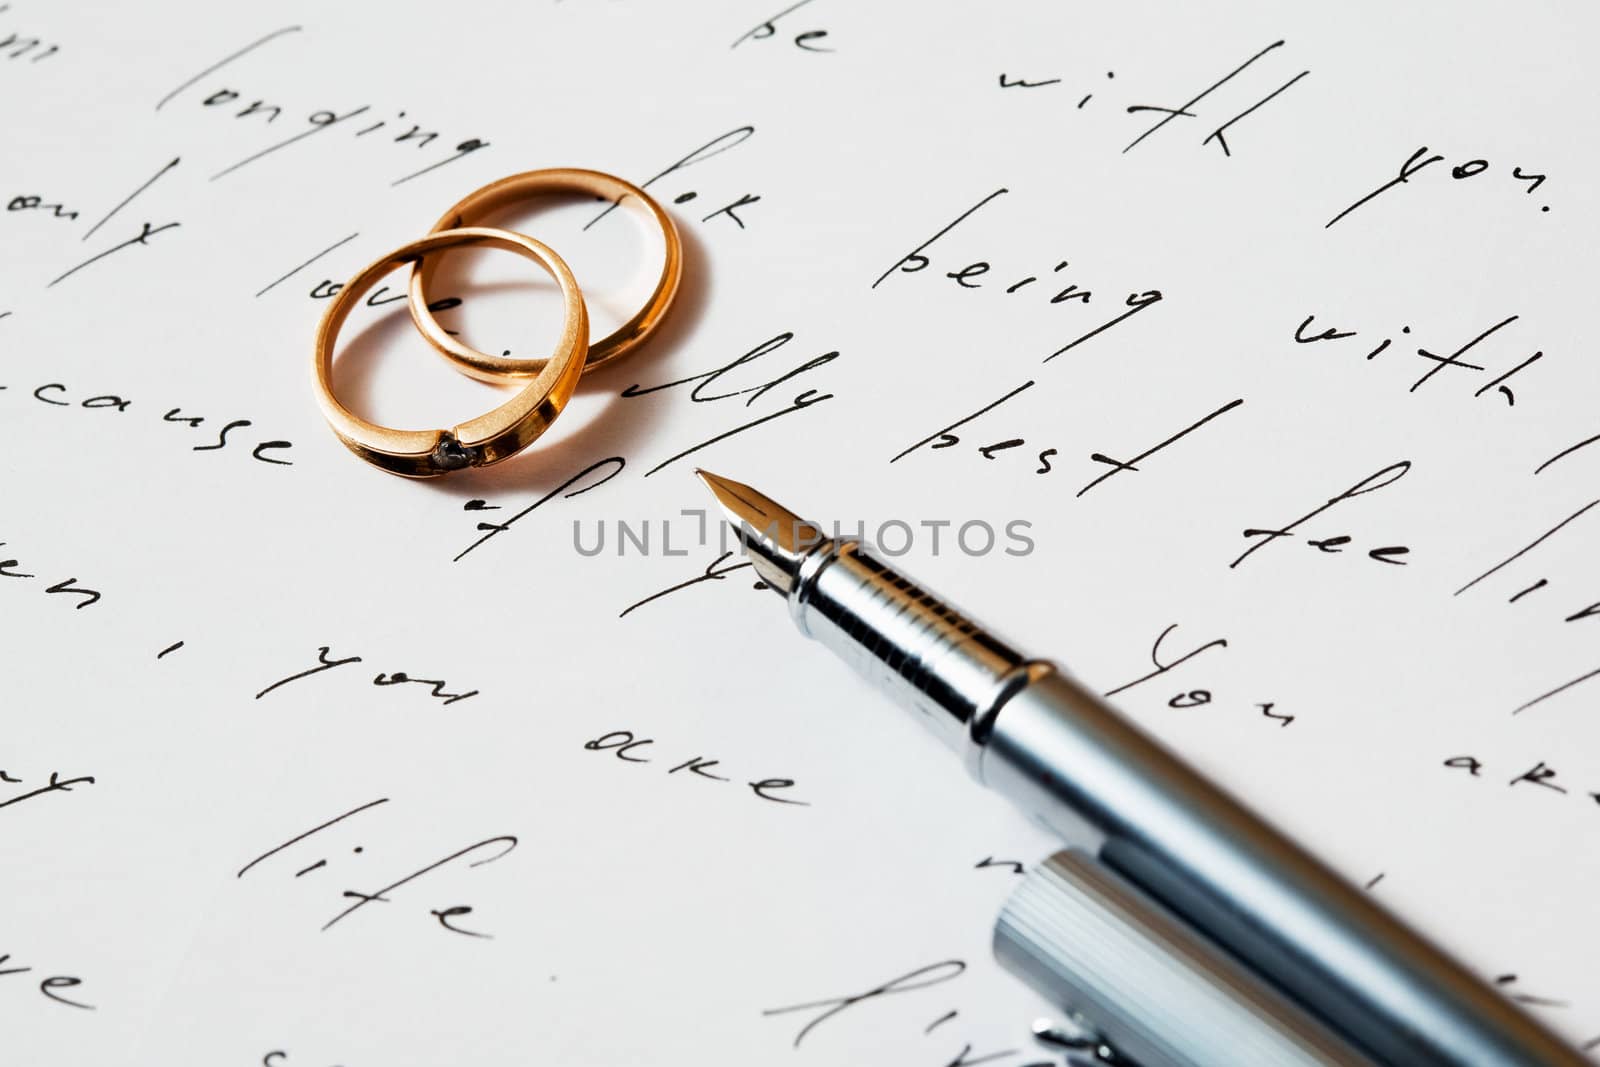 An image of two rings and a pen on a letter